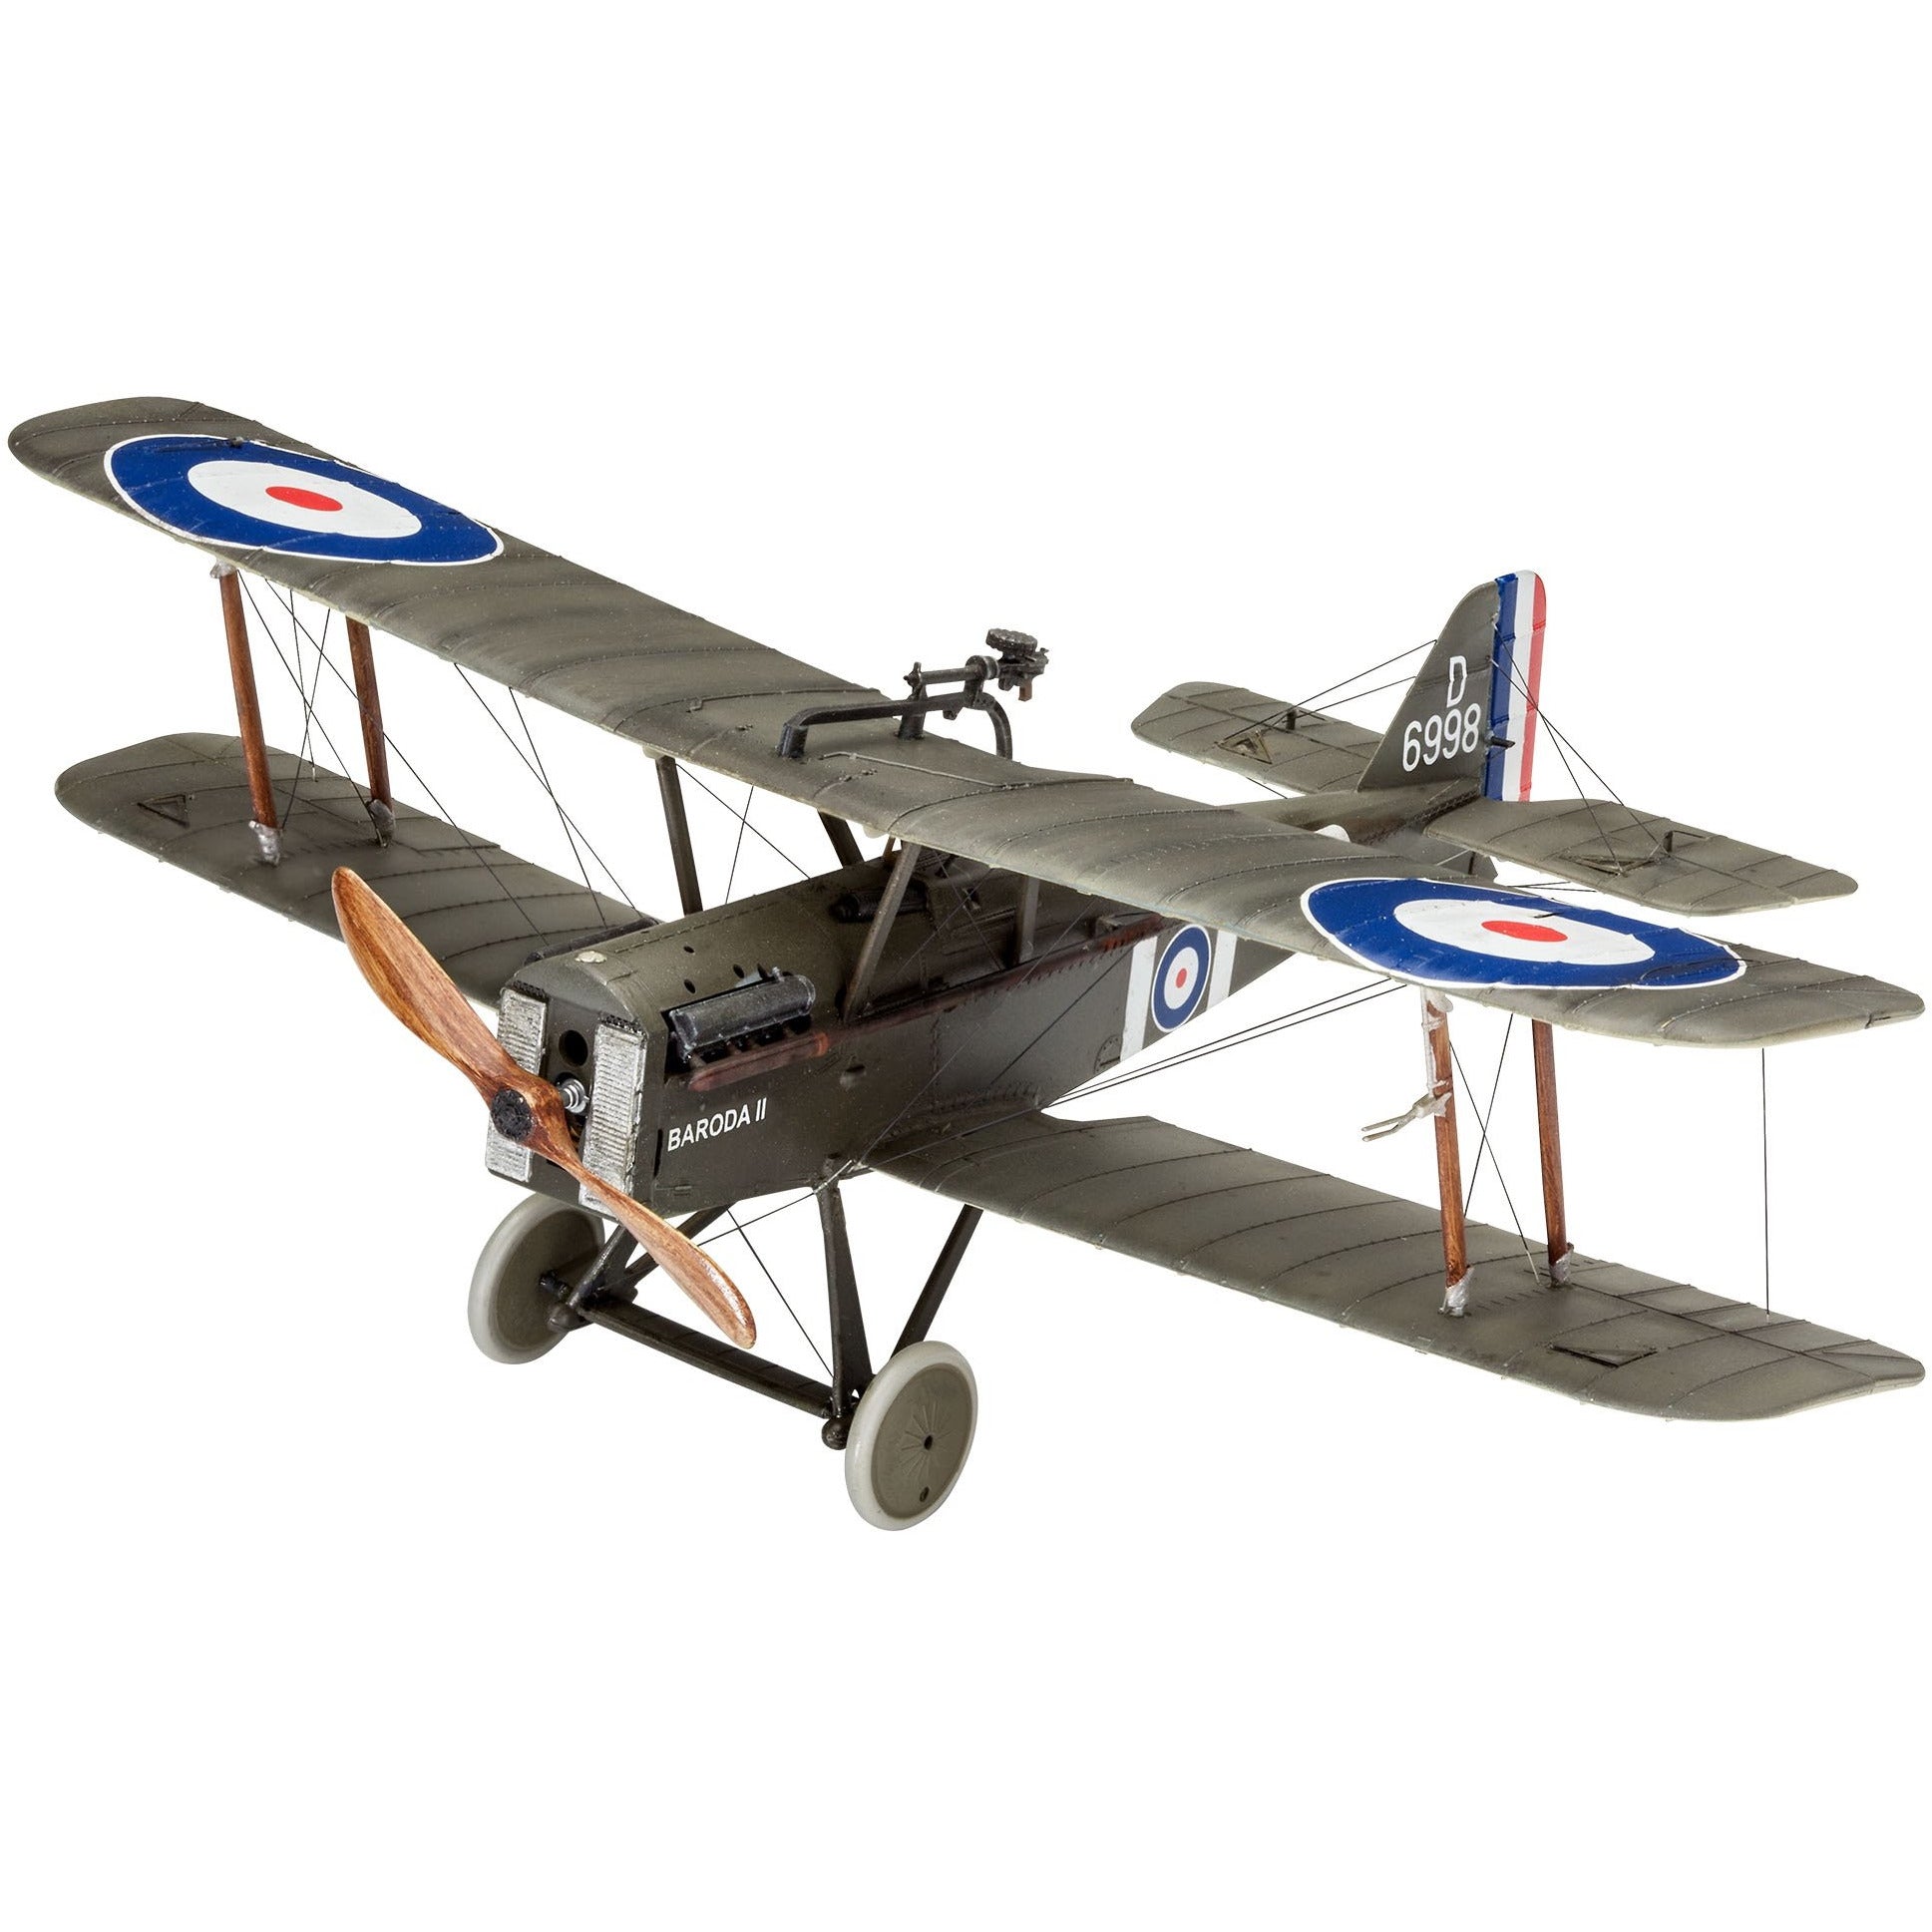 British S.E.5a 1/48 by Revell